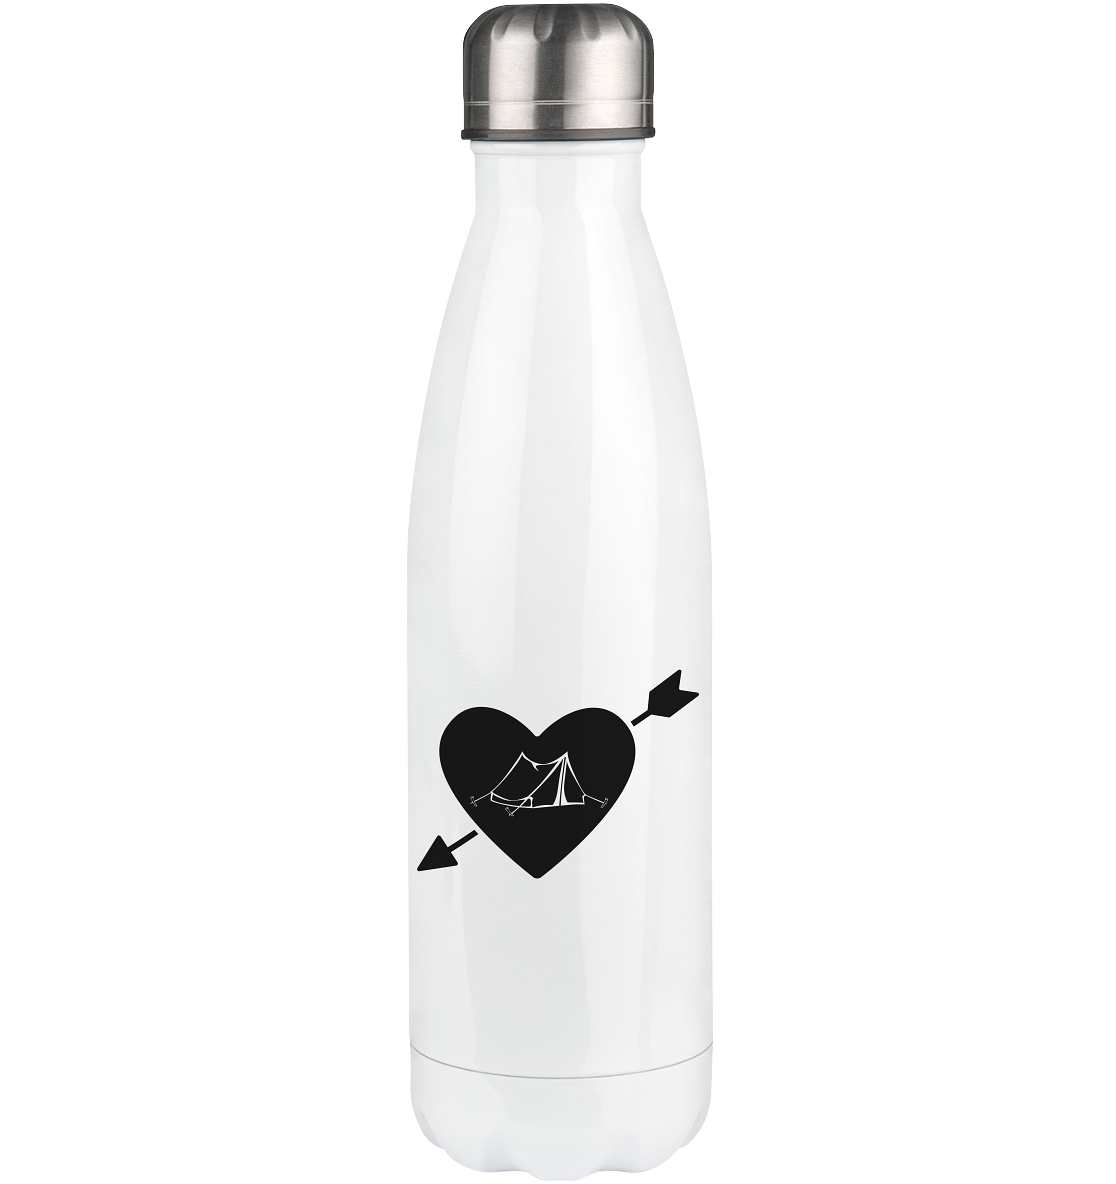 Arrow Heart and Camping 1 - Edelstahl Thermosflasche camping UONP 500ml